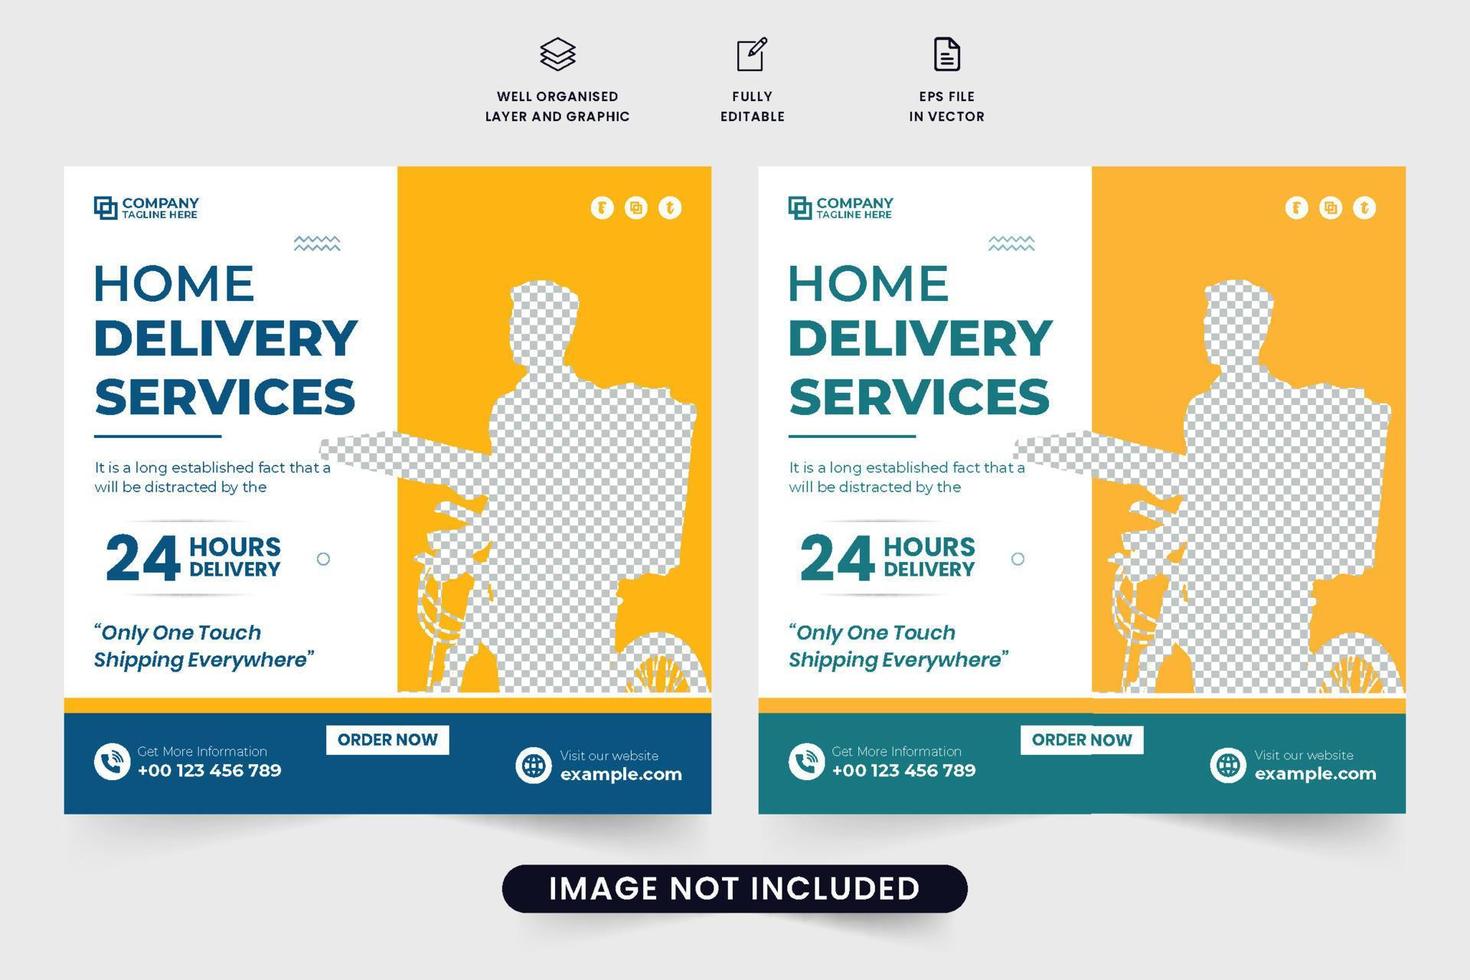 Online food delivery service template with blue and yellow colors. 24-hour home delivery business social media post vector. Express delivery service web banner design for a supermarket promotion. vector